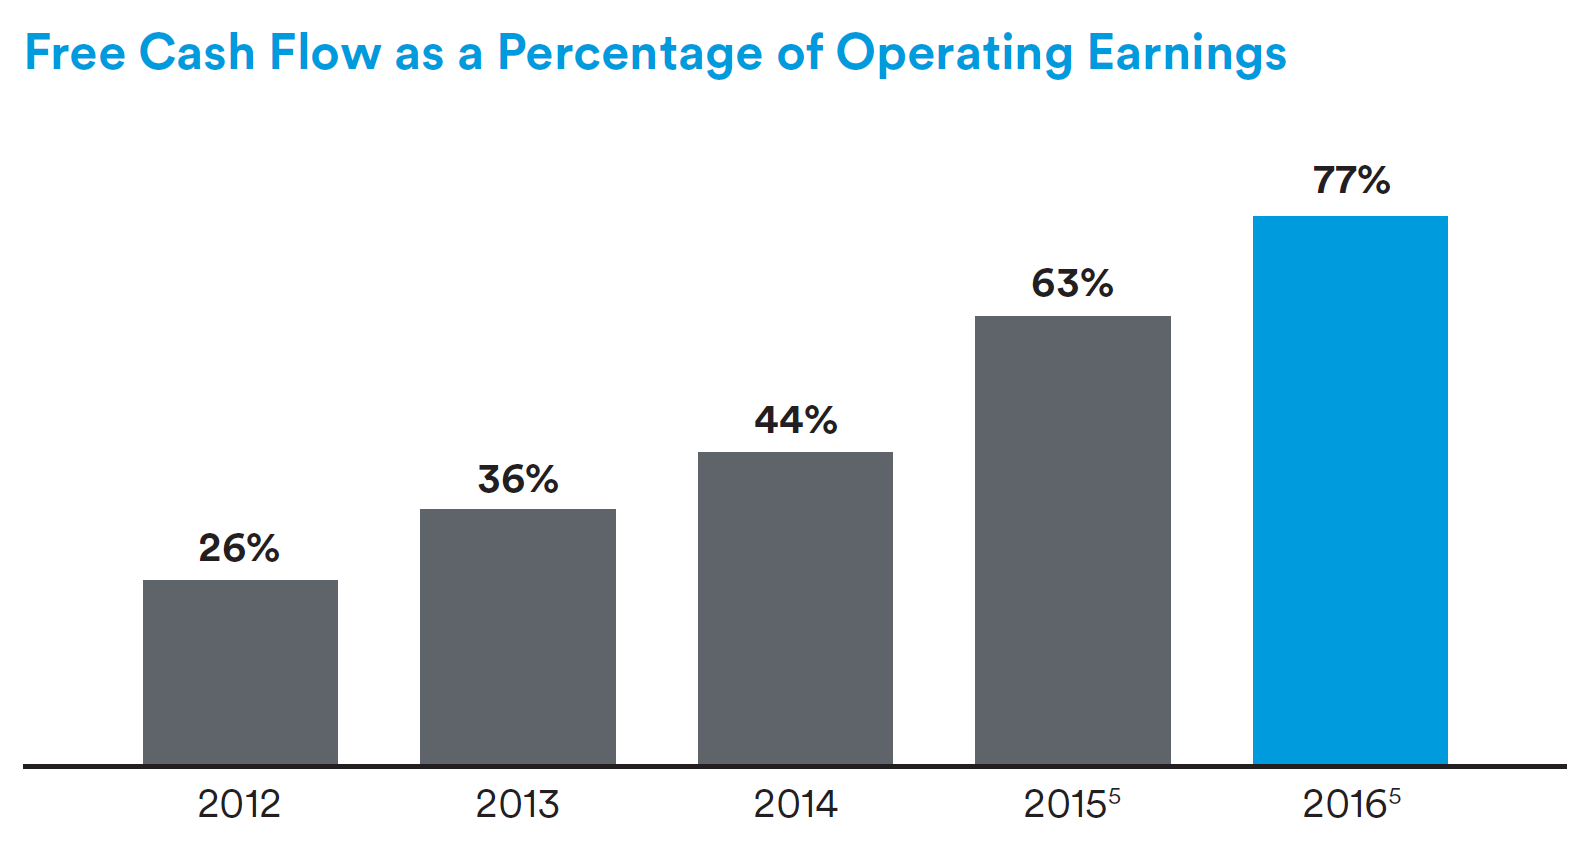 Free Cash Flow as a Percentage of Operating Earnings